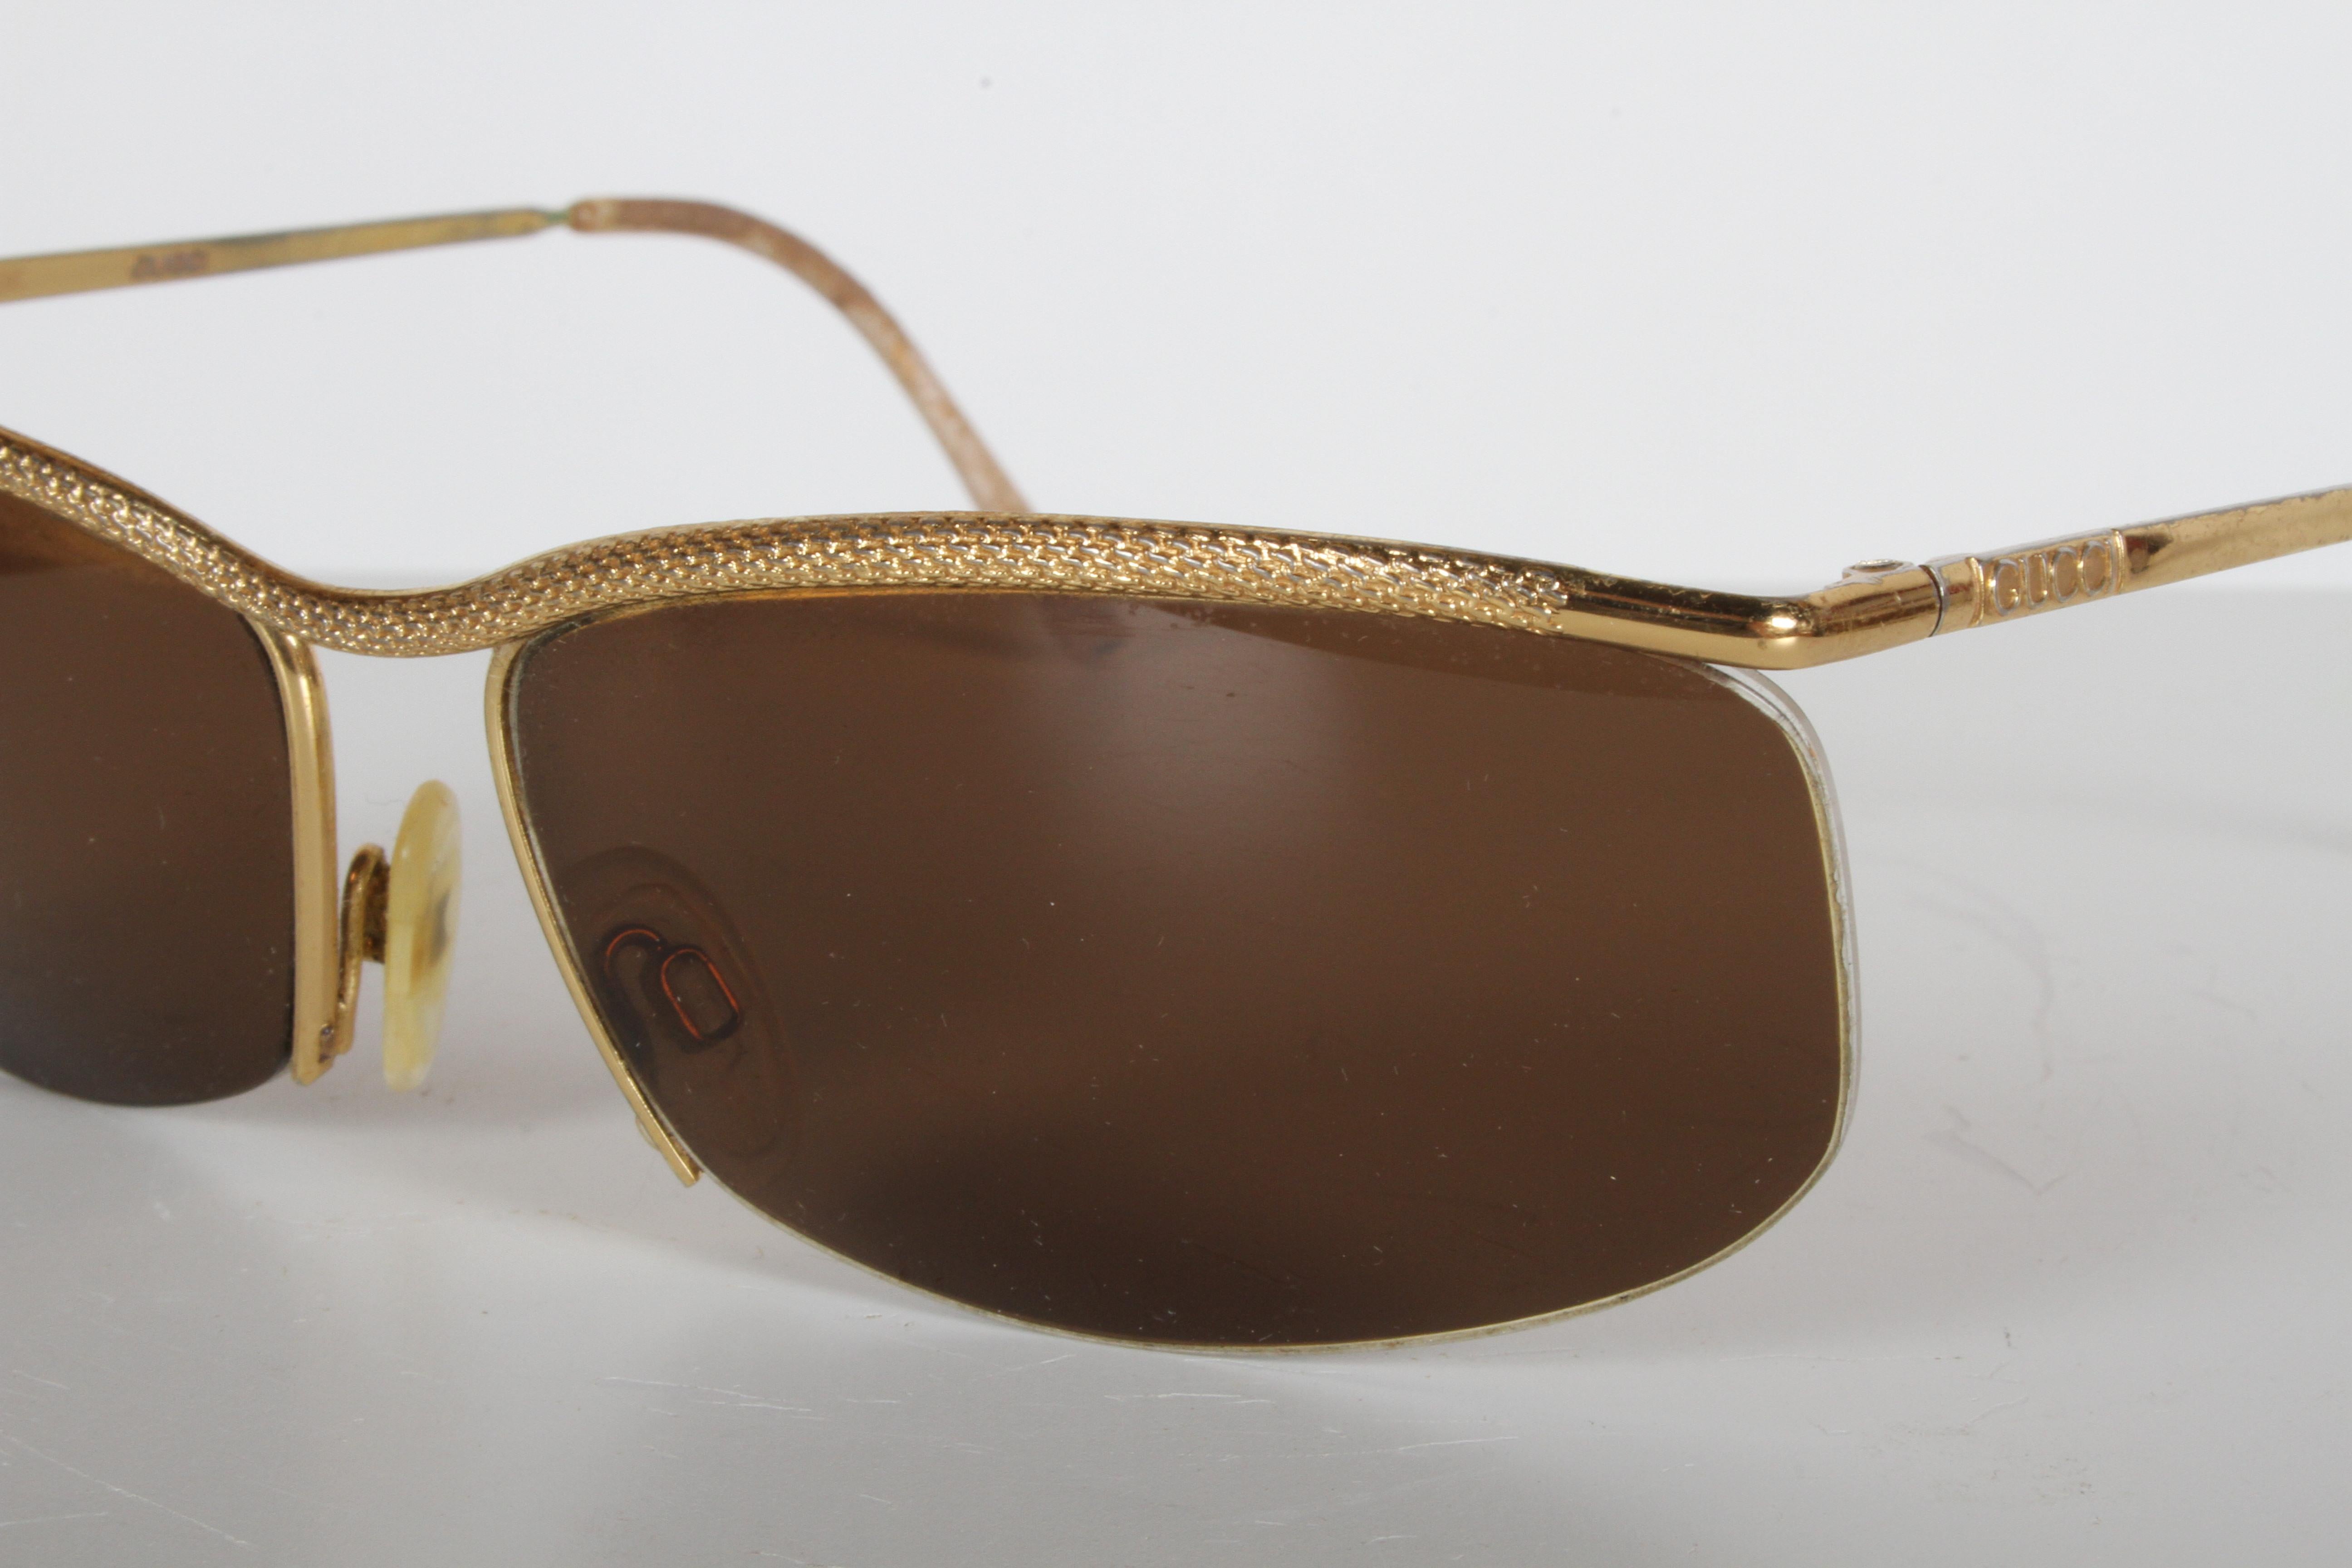 Vintage 1970s Gucci 22-Karat Gold-Plated Wrap Sunglasses with Brown Lenses Italy For Sale 1